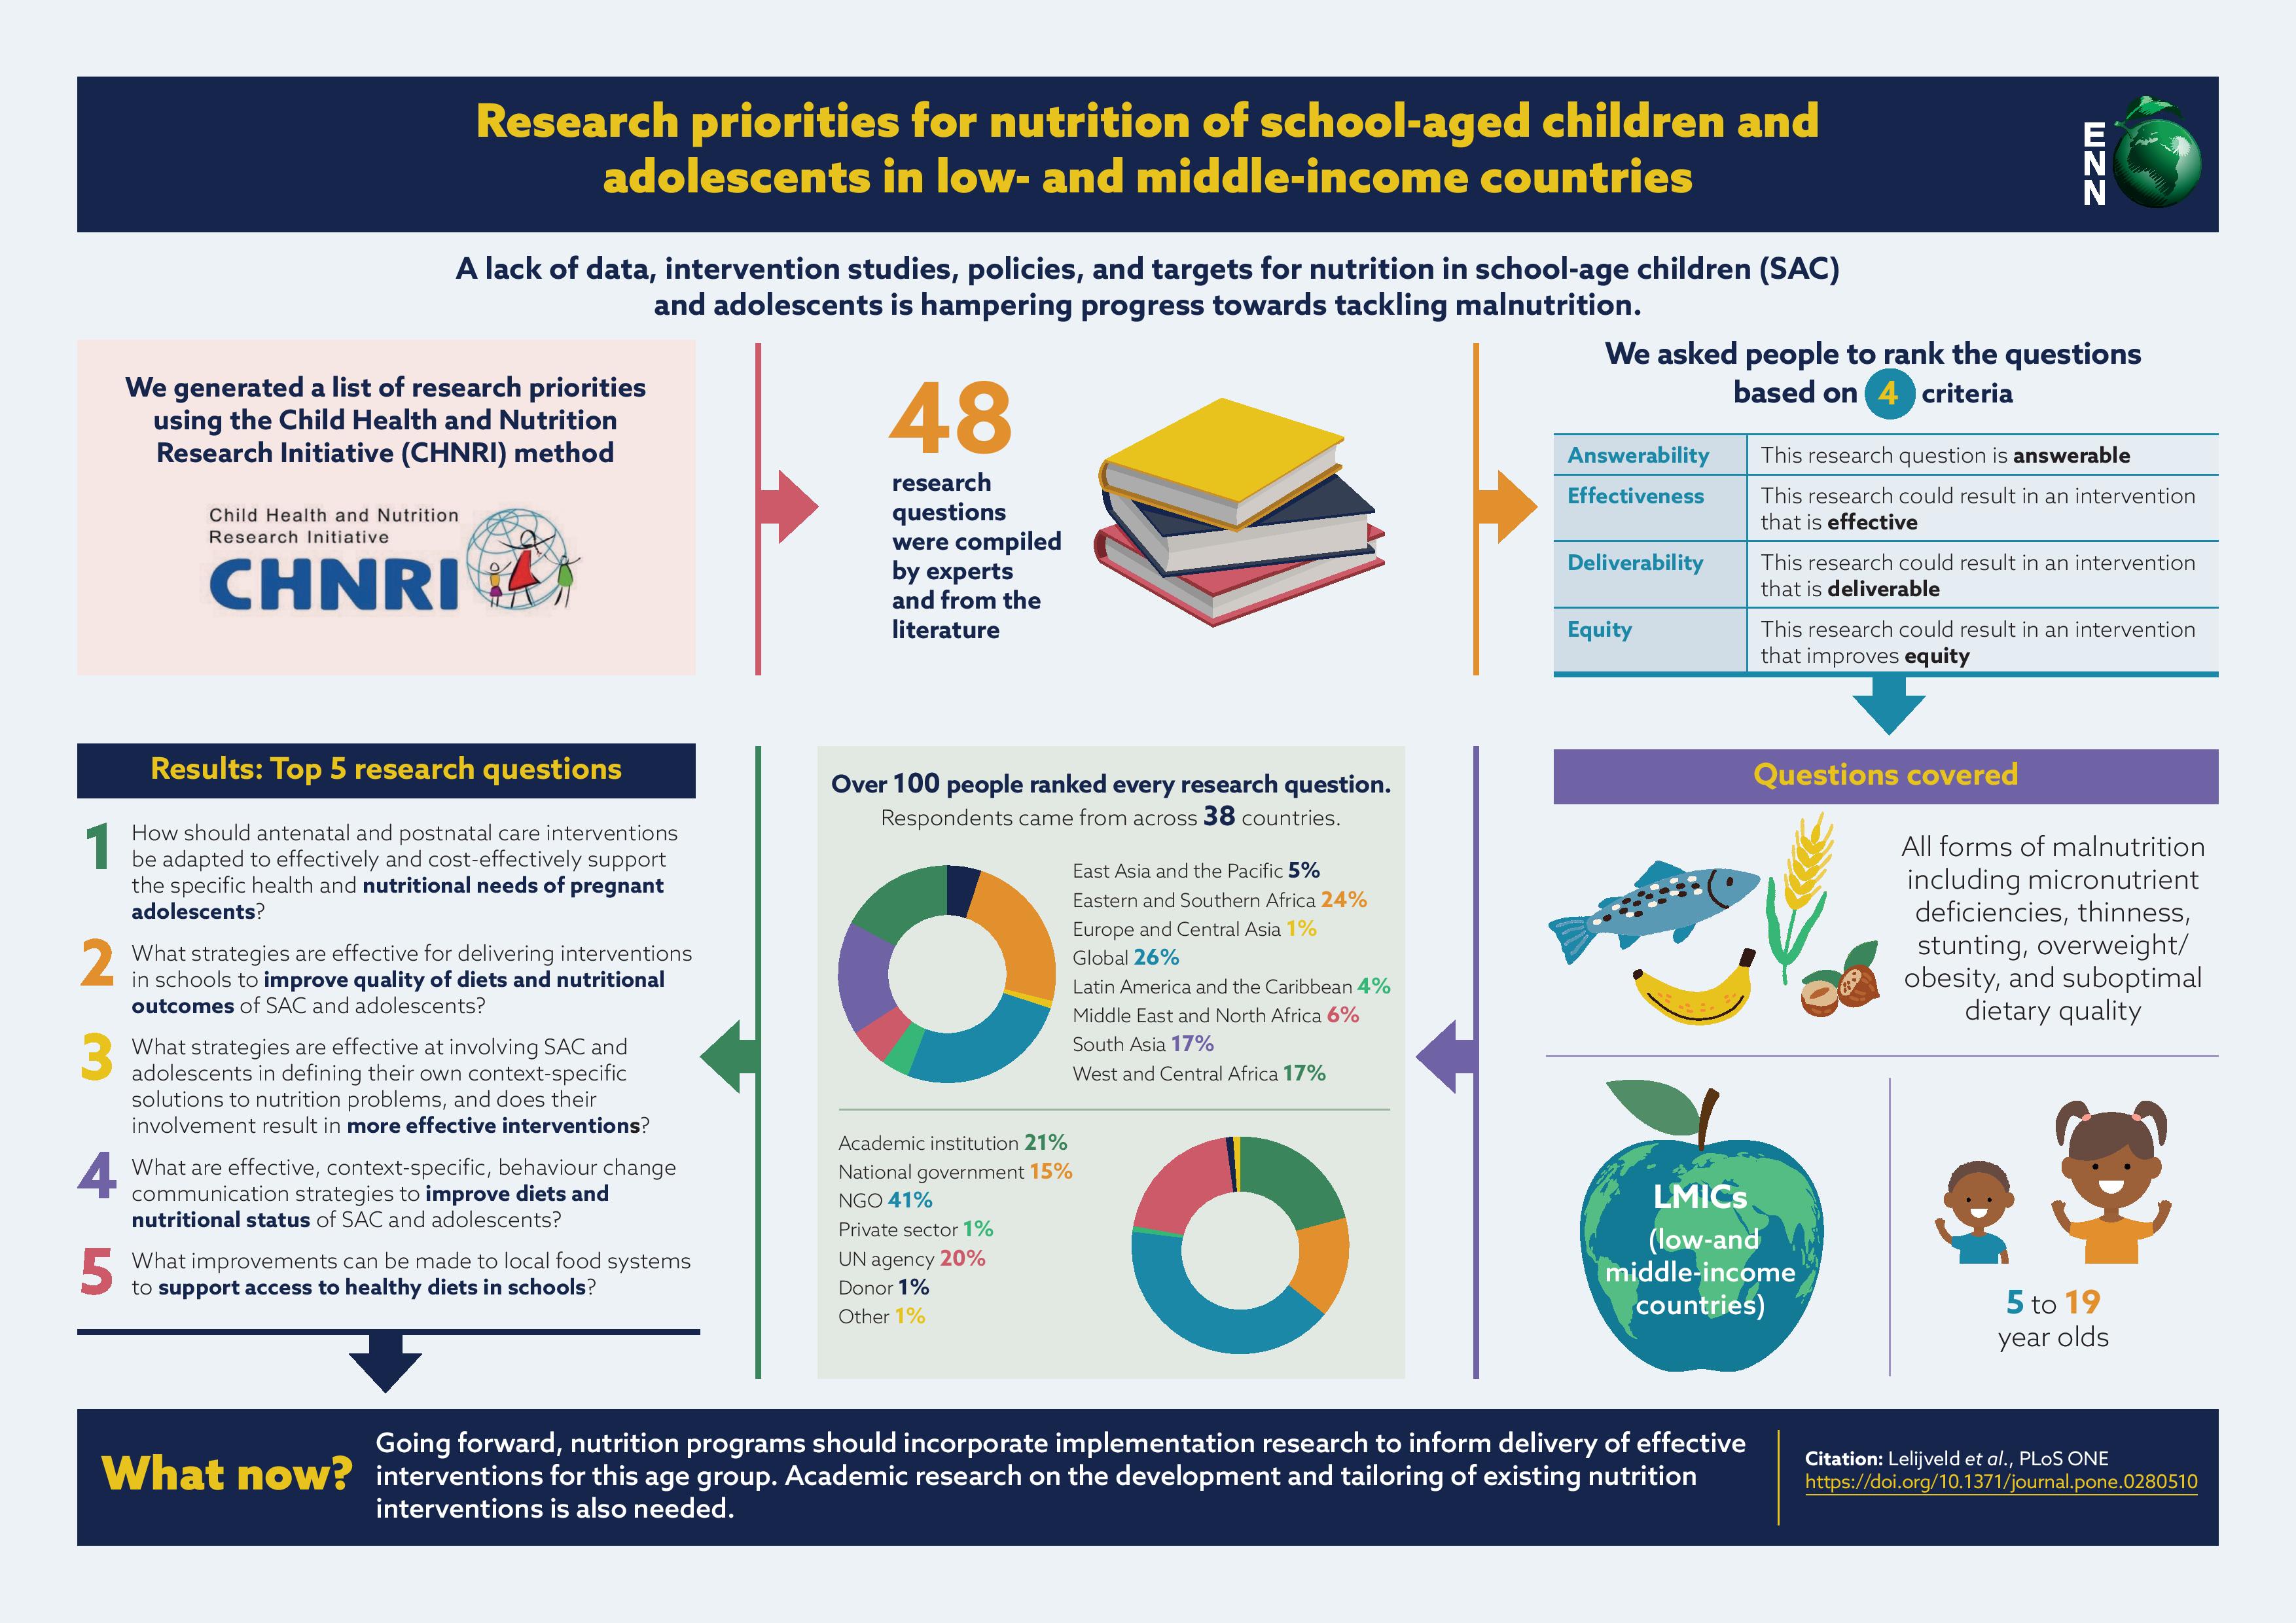 Infographic on Research priorities for nutrition of school-aged children and adolescents in low- and middle-income countries